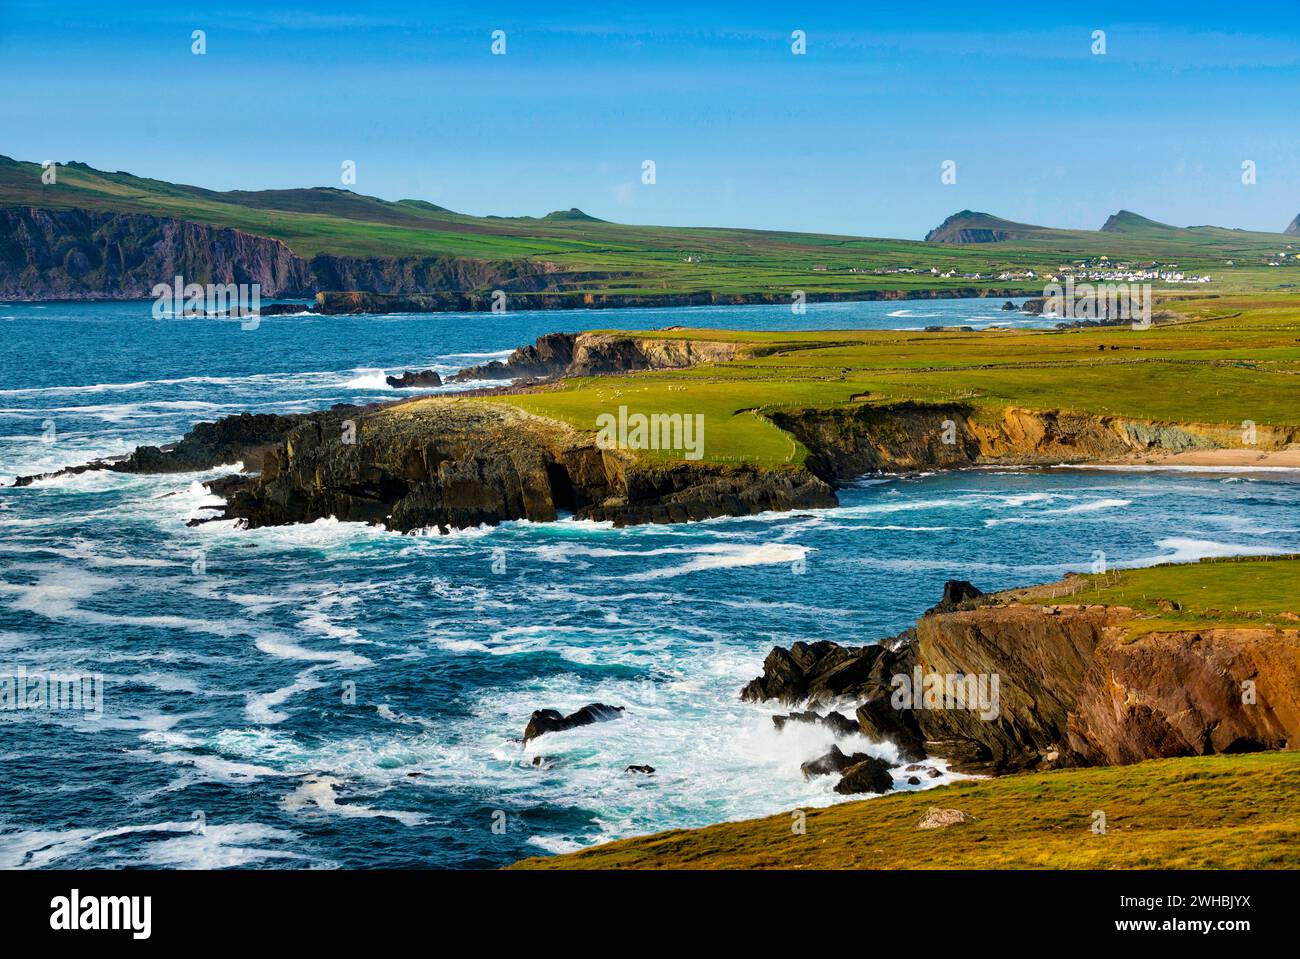 From Clougher Head looking over Ferriter's Cove, towards Sybil Point, Dingle Peninsula, County Kerry, Ireland Stock Photo